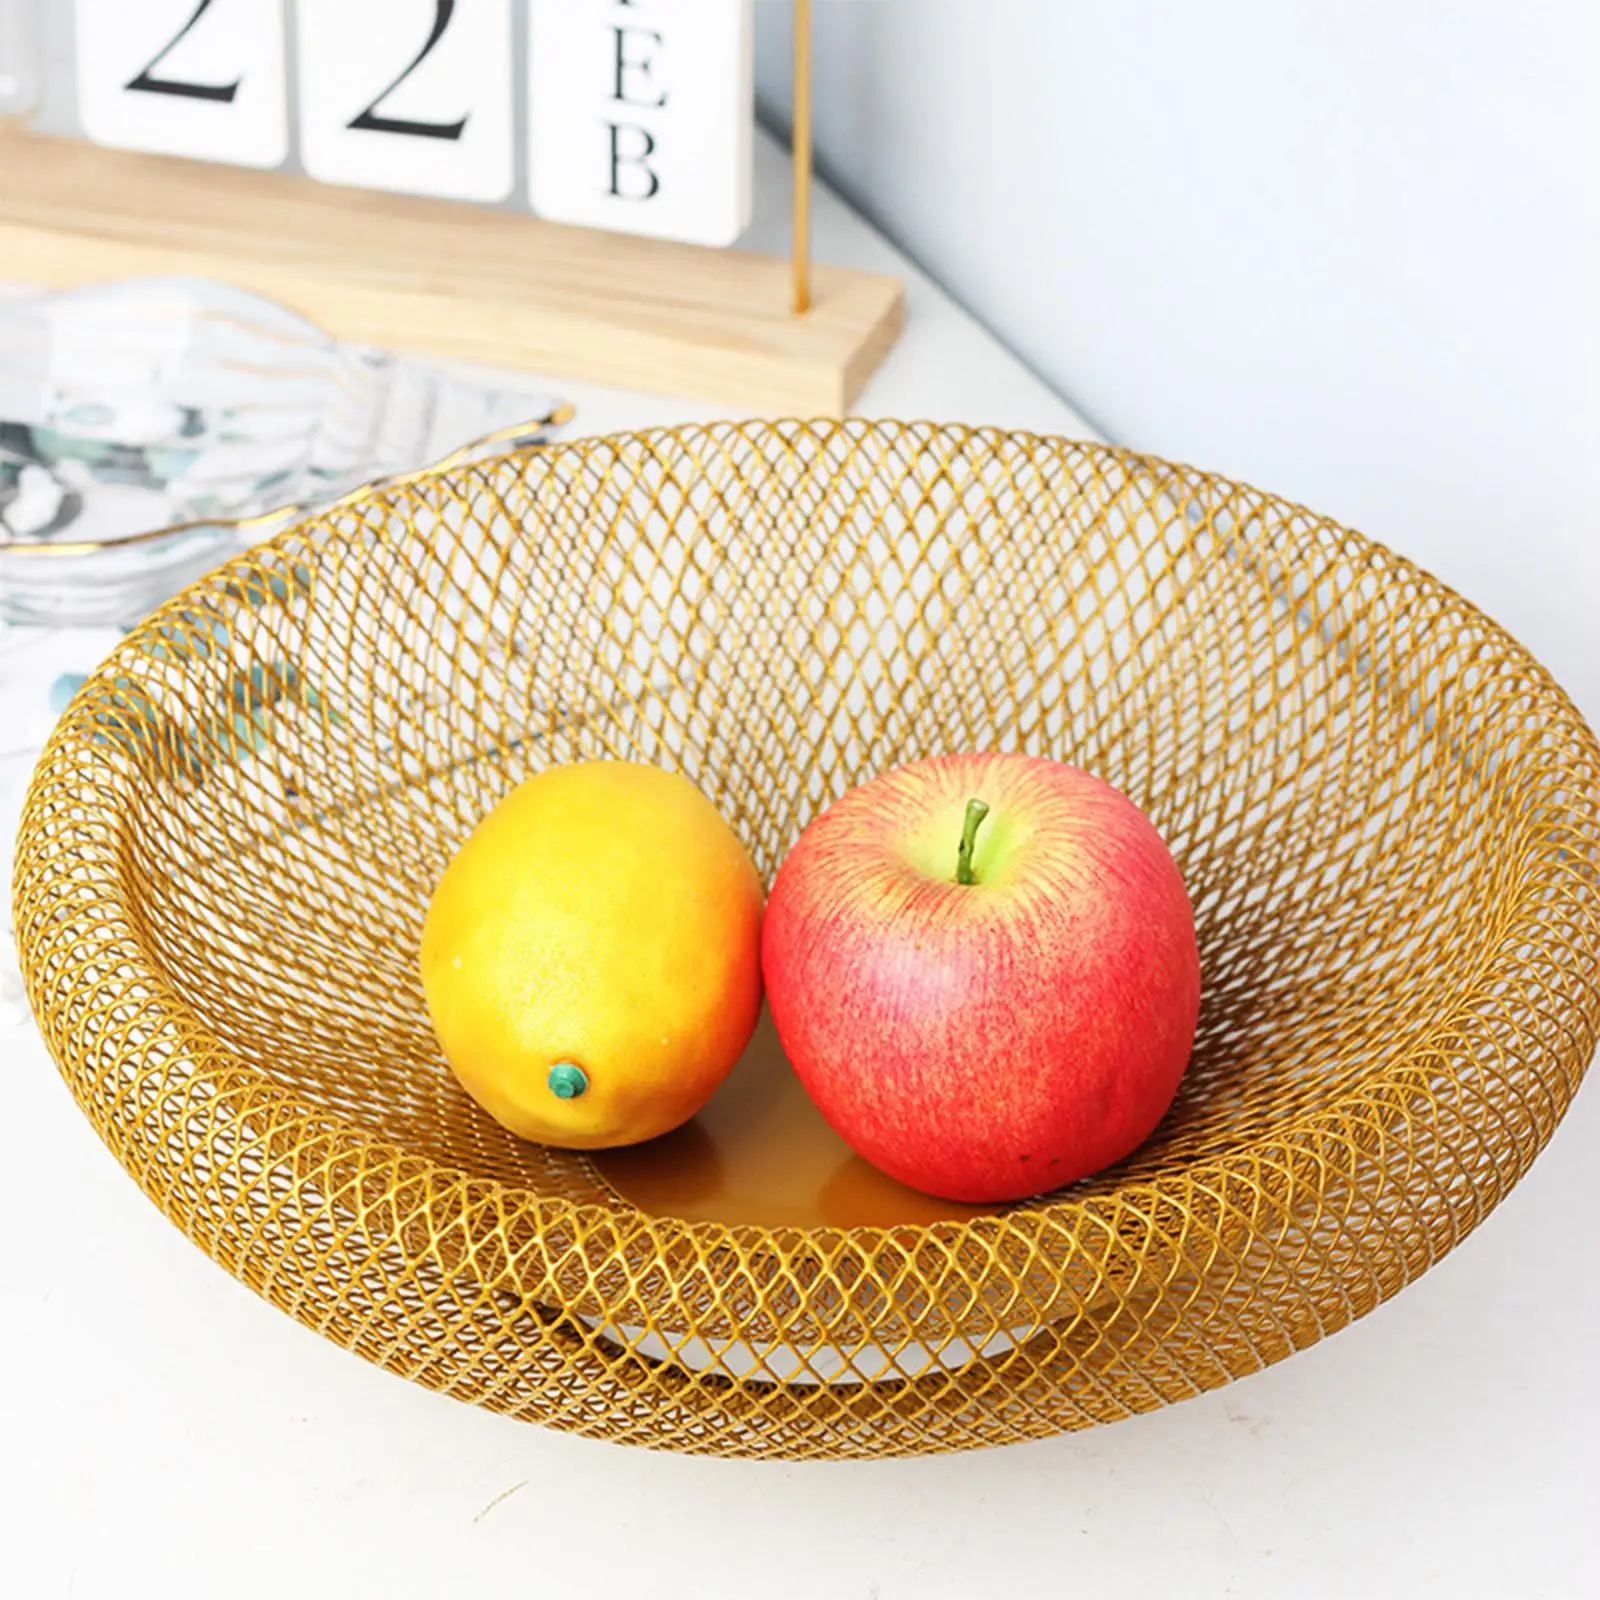 Nordic Wire Iron Fruit Basket Snack Storage Bowl Table Organizer Vegetable Stand Holder for Kitchen Ceremony Home Ornaments